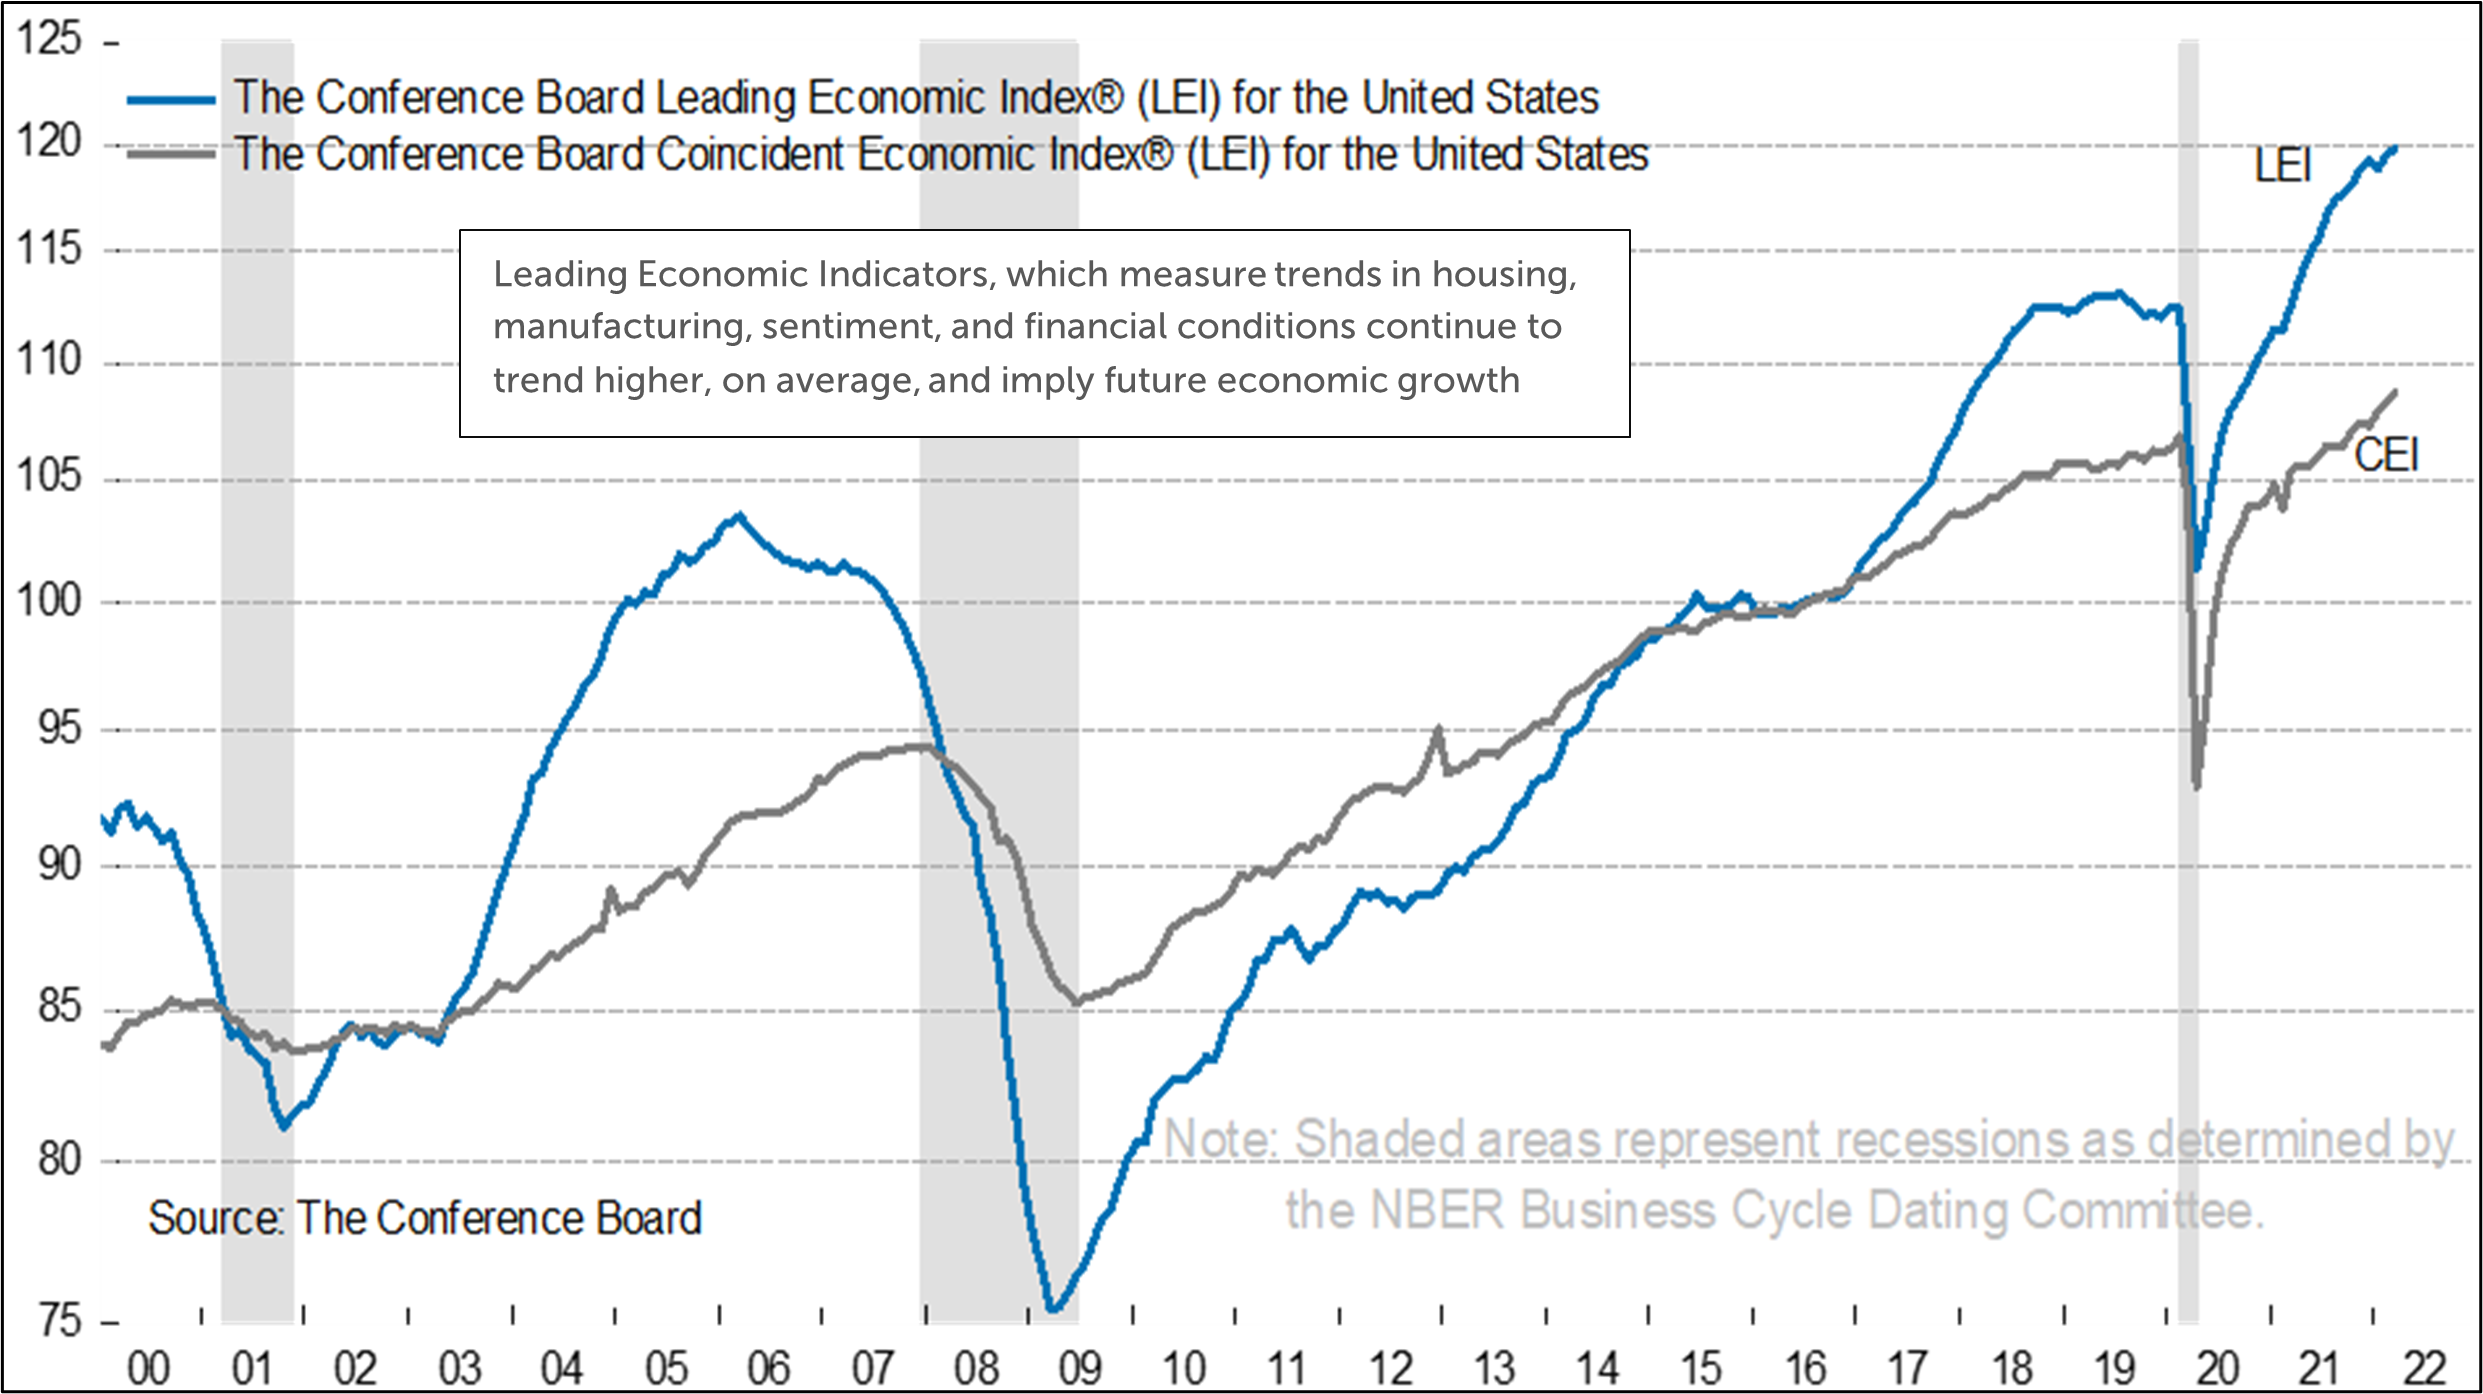 Line graphs depicting The Conference Board Leading Economic Index® (LEI) for the United States and The Conference Board Coincident Economic Index® (LEI) for the United States